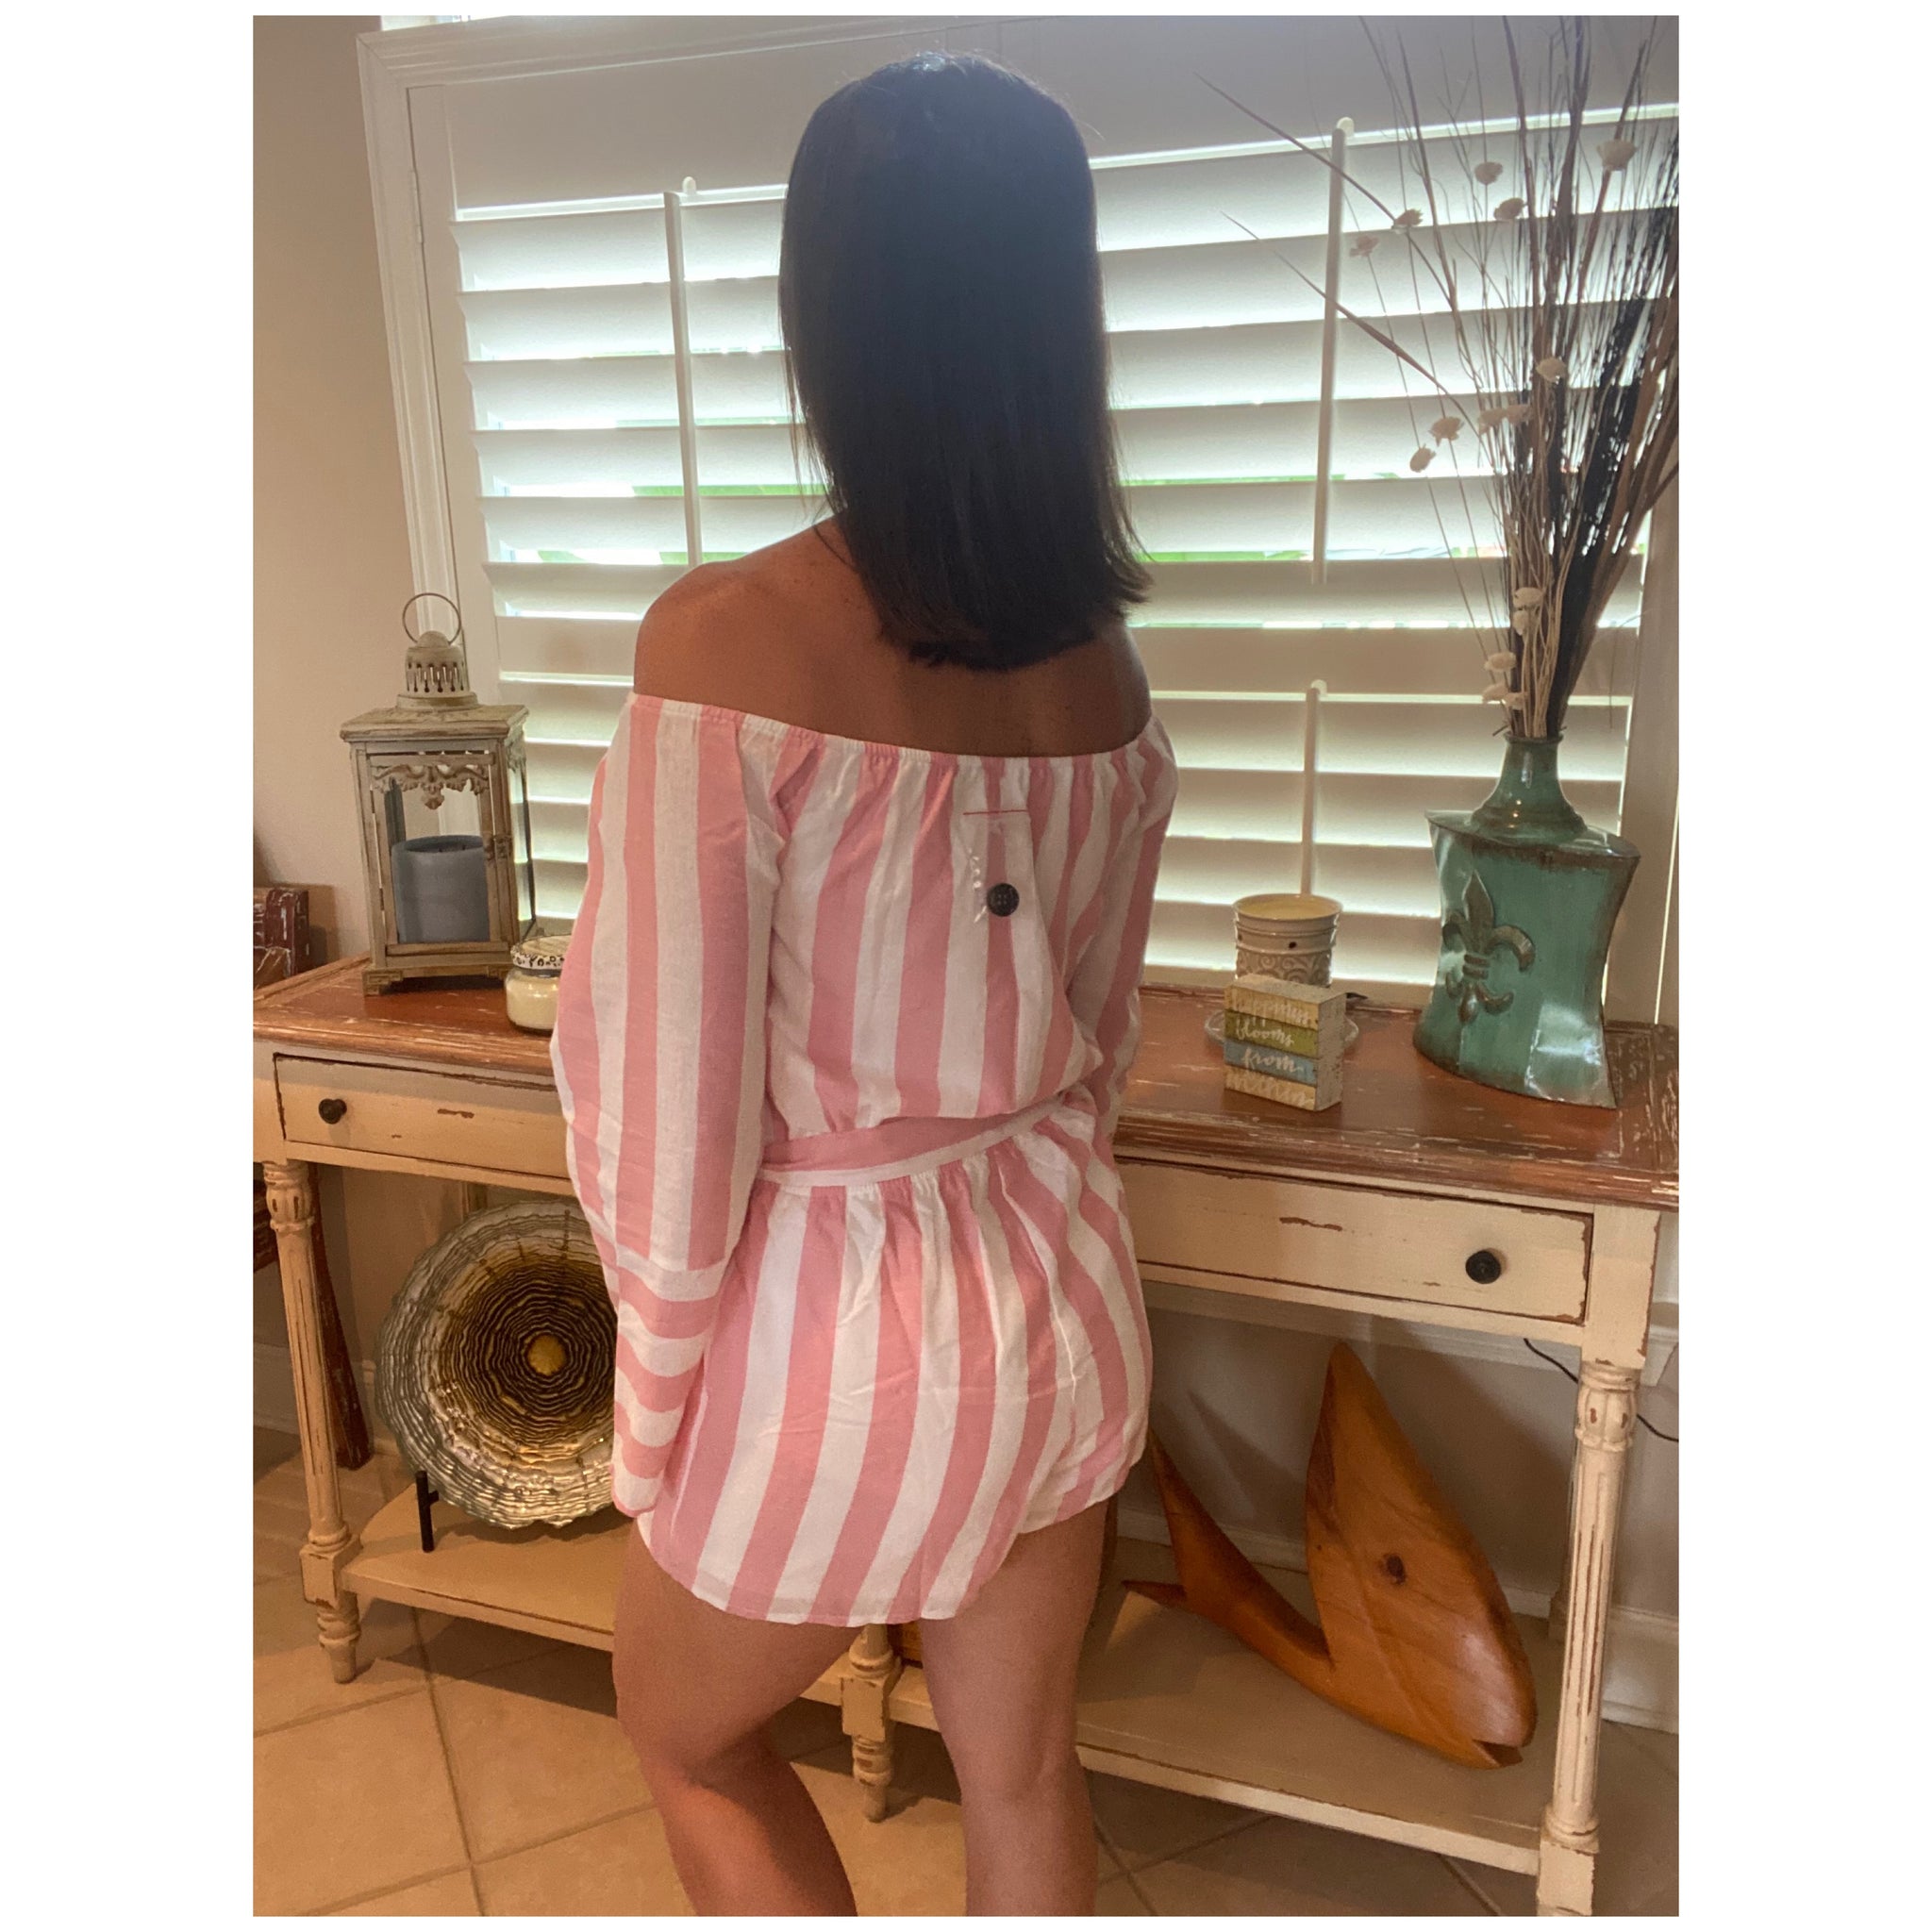 Sexy Off Shoulder Striped Button Dressy Belted Romper Shorts Pink S/M/L